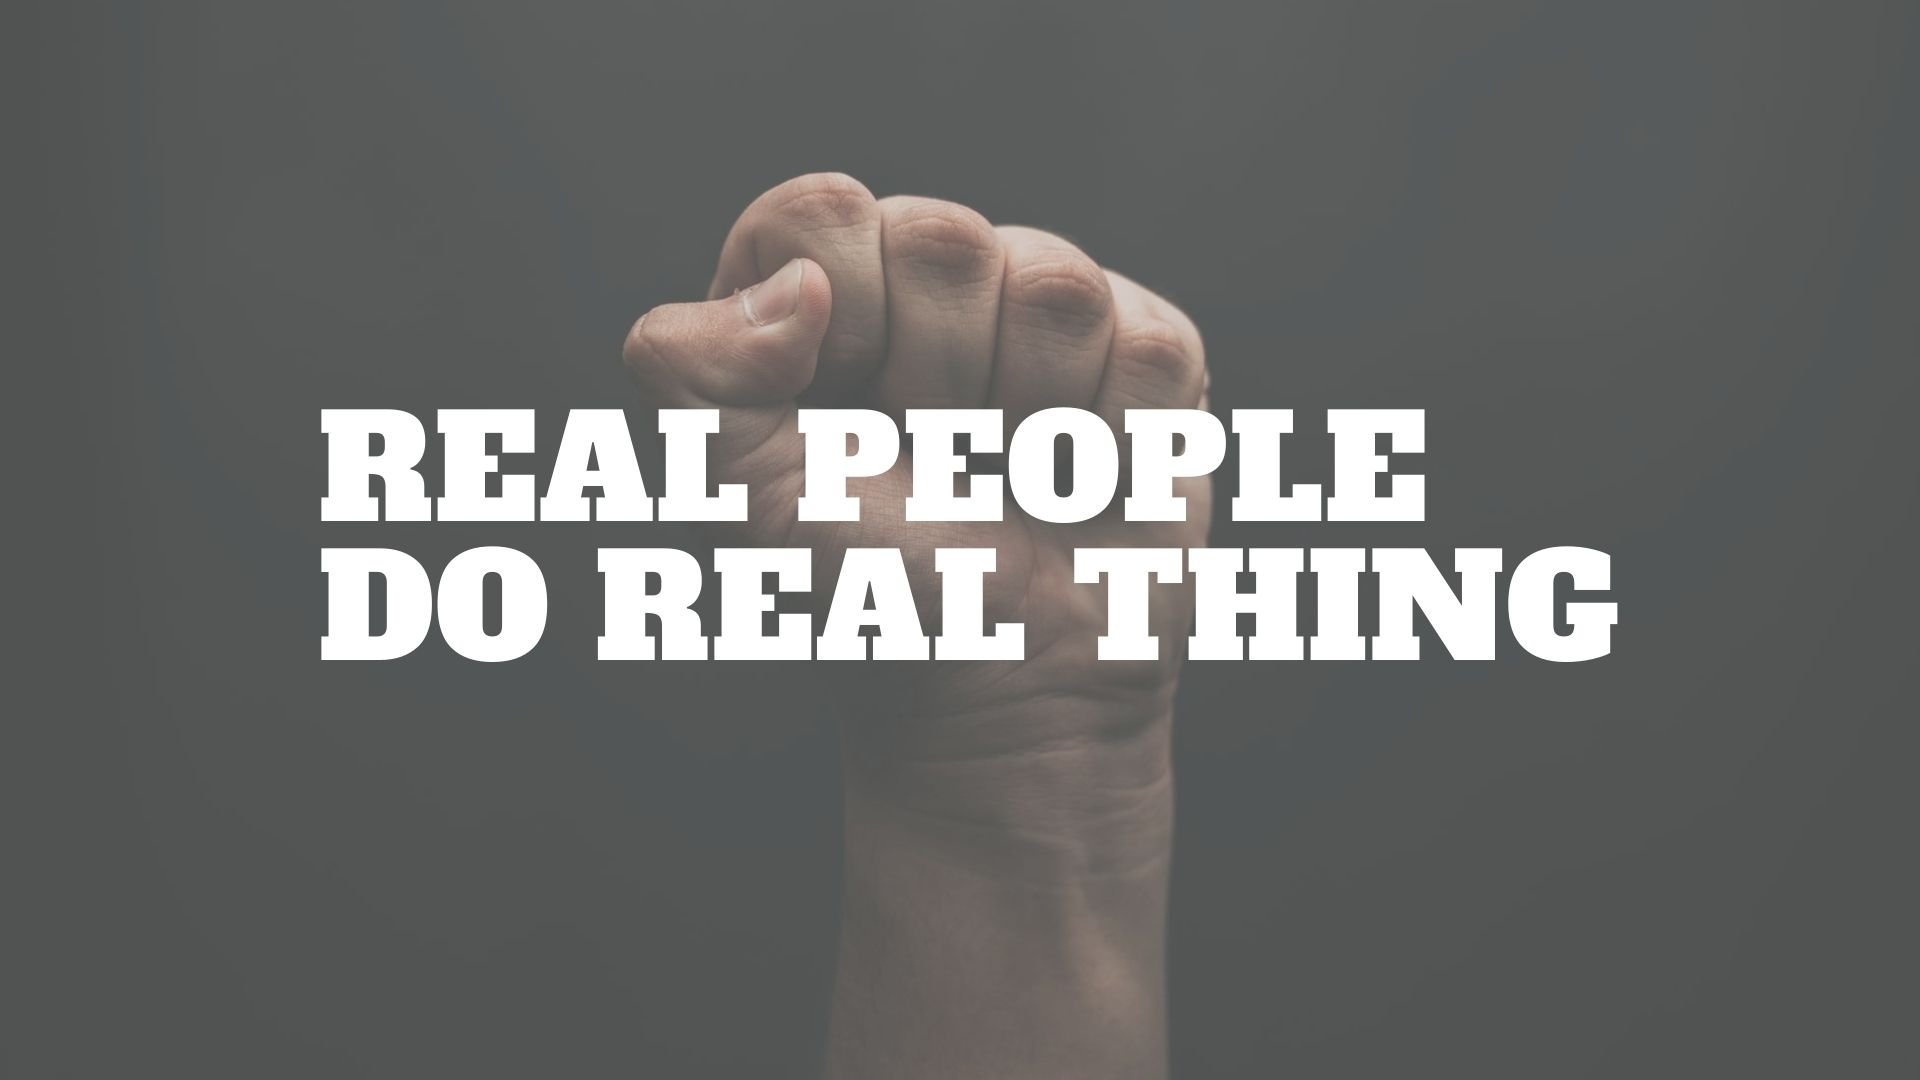 Real people do real thing